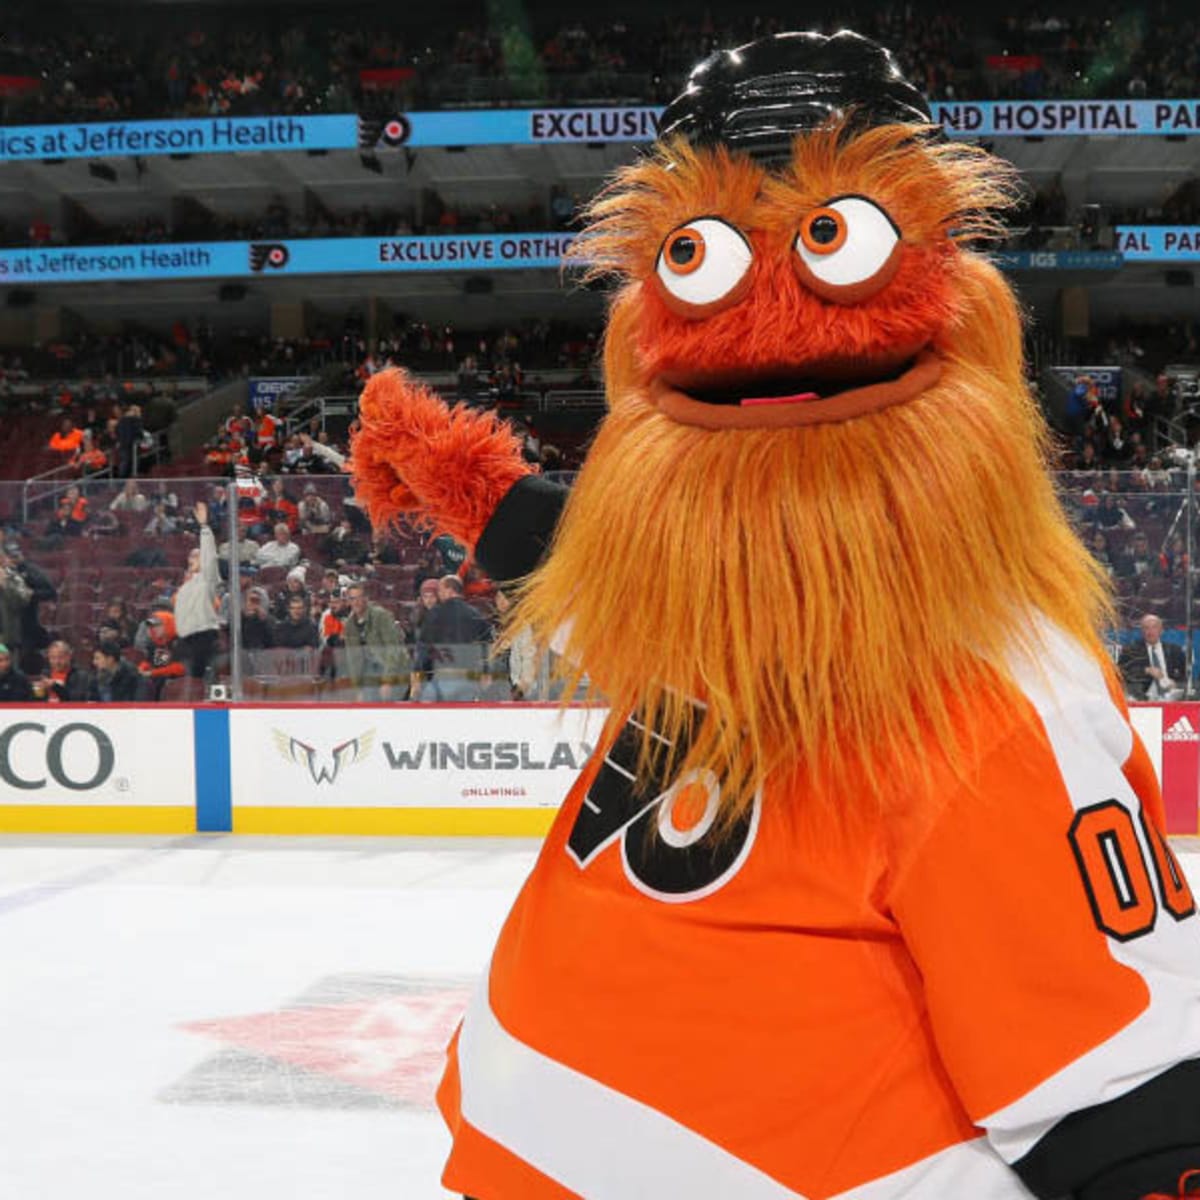 Gritty unveiled the new Seattle Kraken mascot at the game in